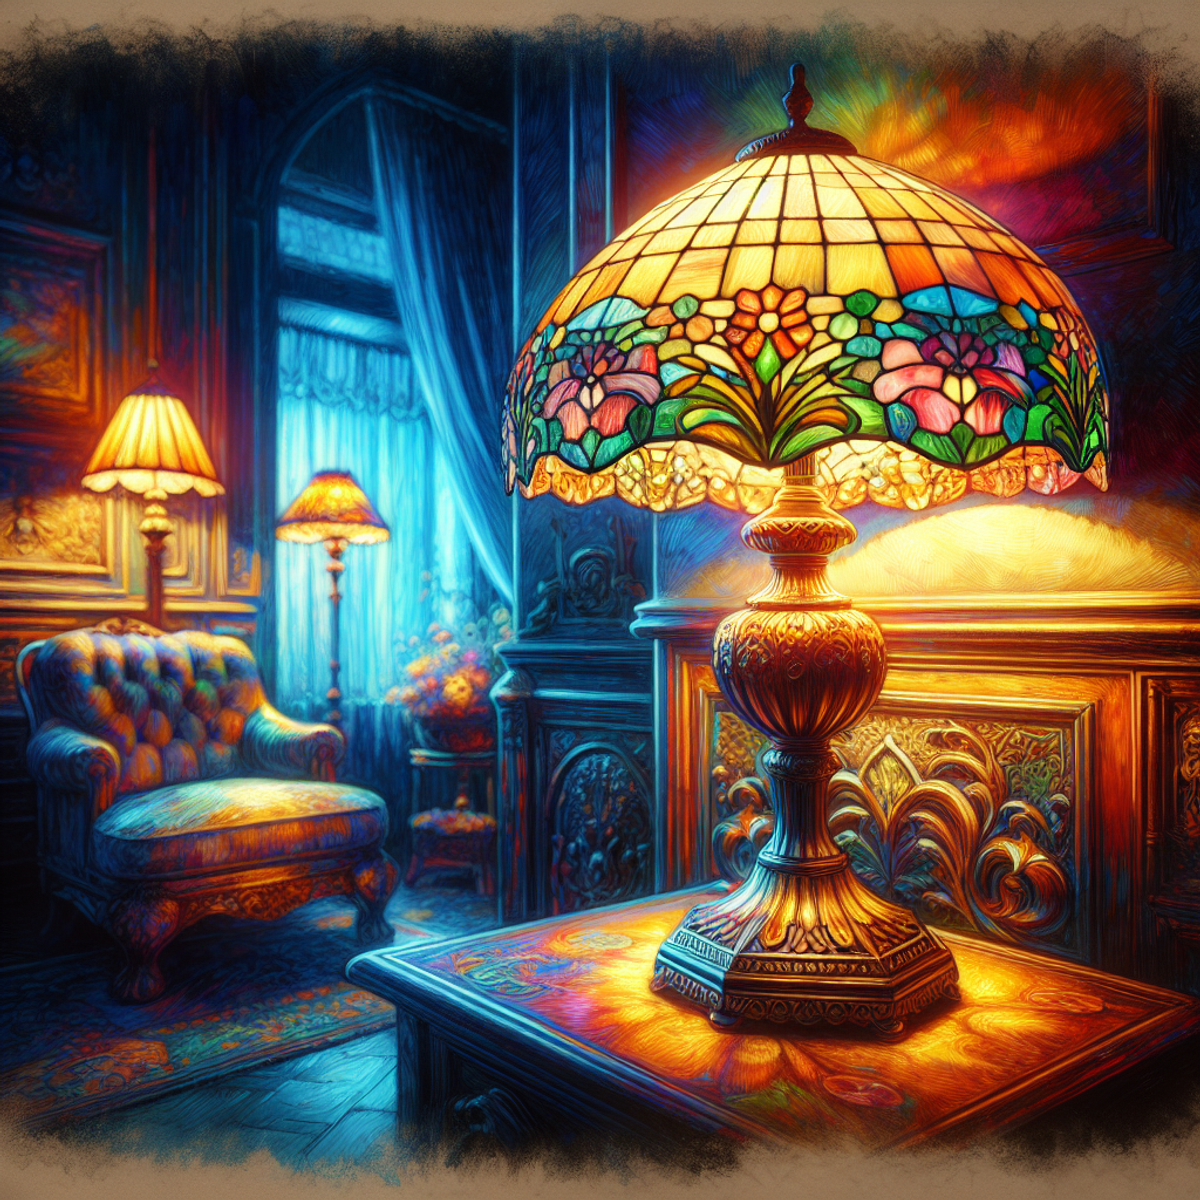 Tiffany style lamp casting warm glow over antique furniture